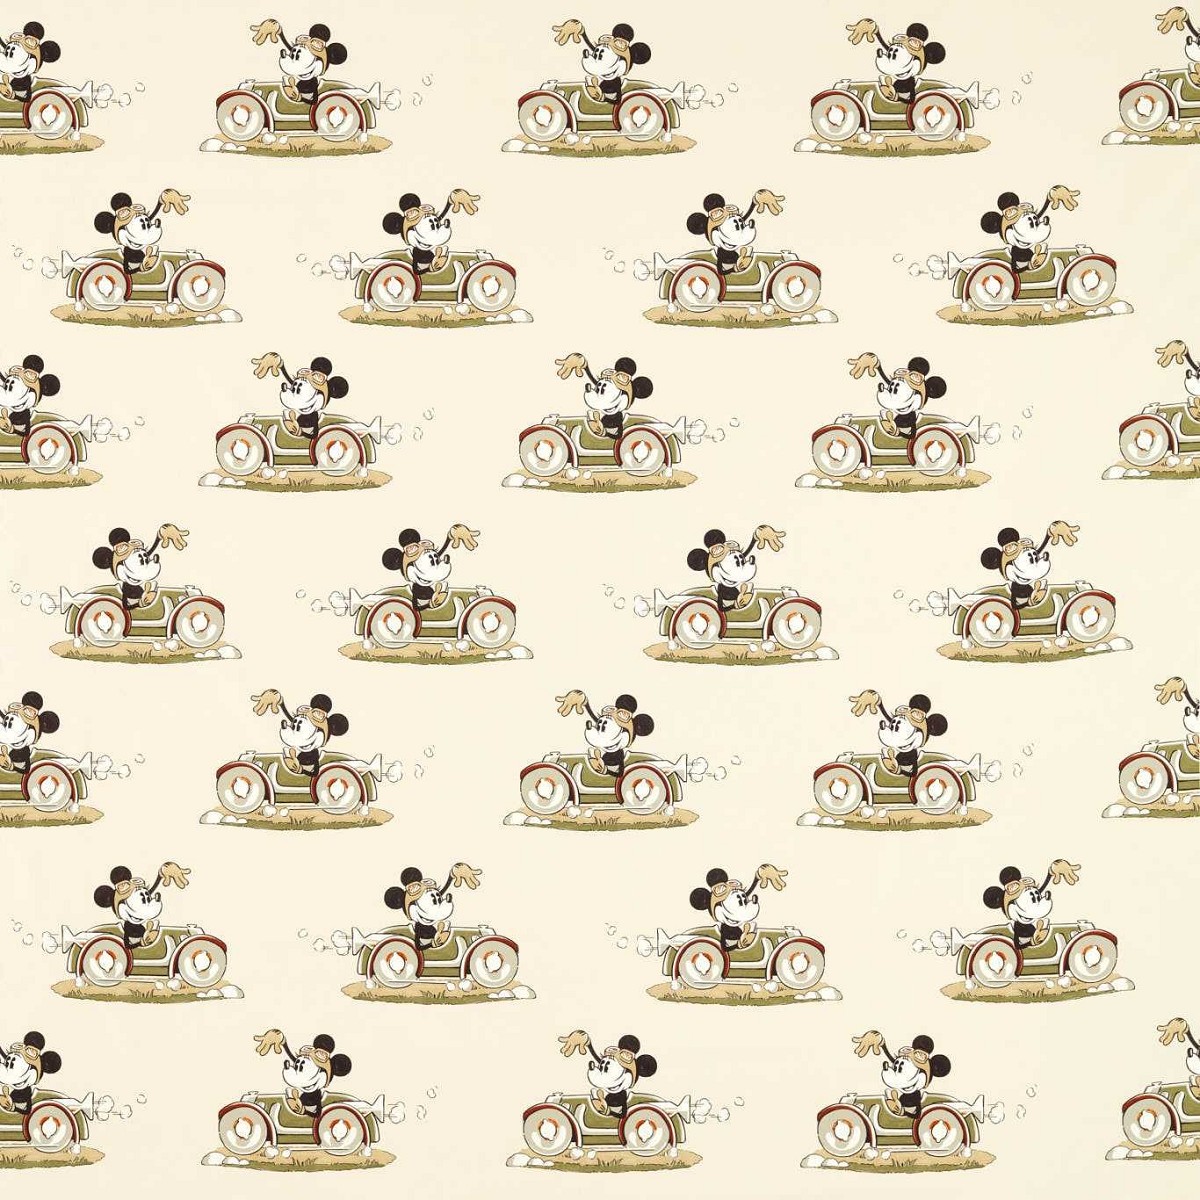 Minnie On The Move Babyccino Fabric by Sanderson